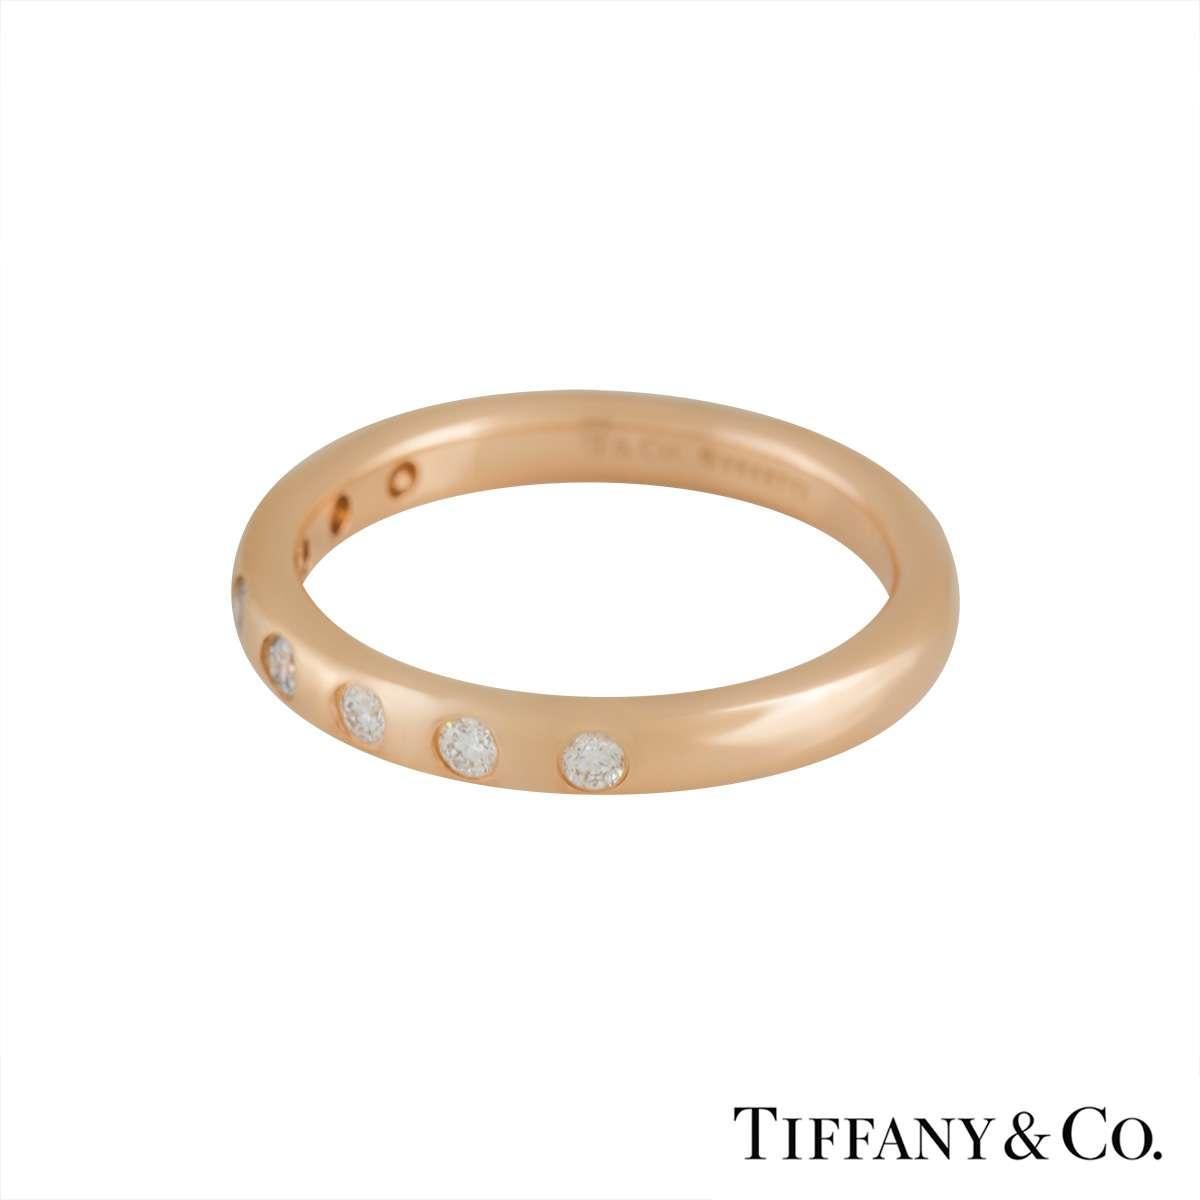 tiffany & co stacking rings